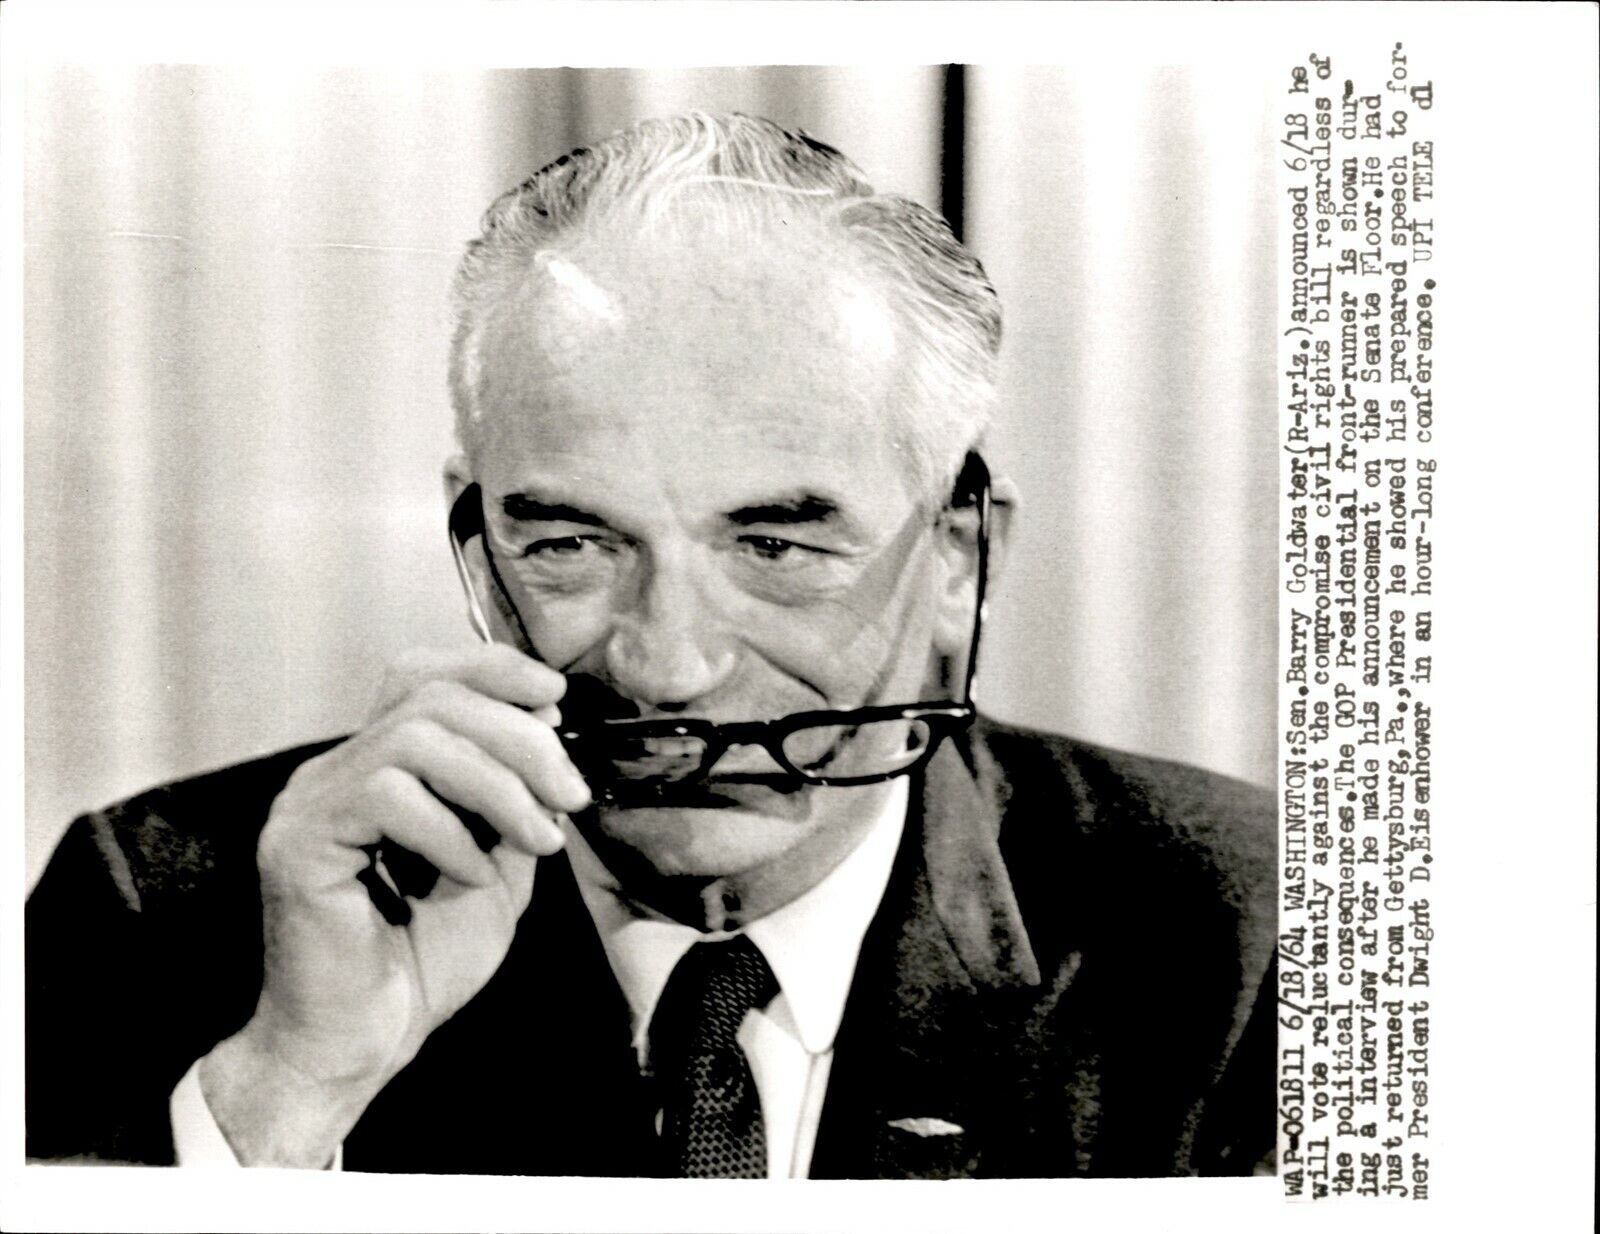 GA150 1964 UPI Wire Photo SEN BARRY GOLDWATER TO VOTE AGAINST CIVIL RIGHTS BILL